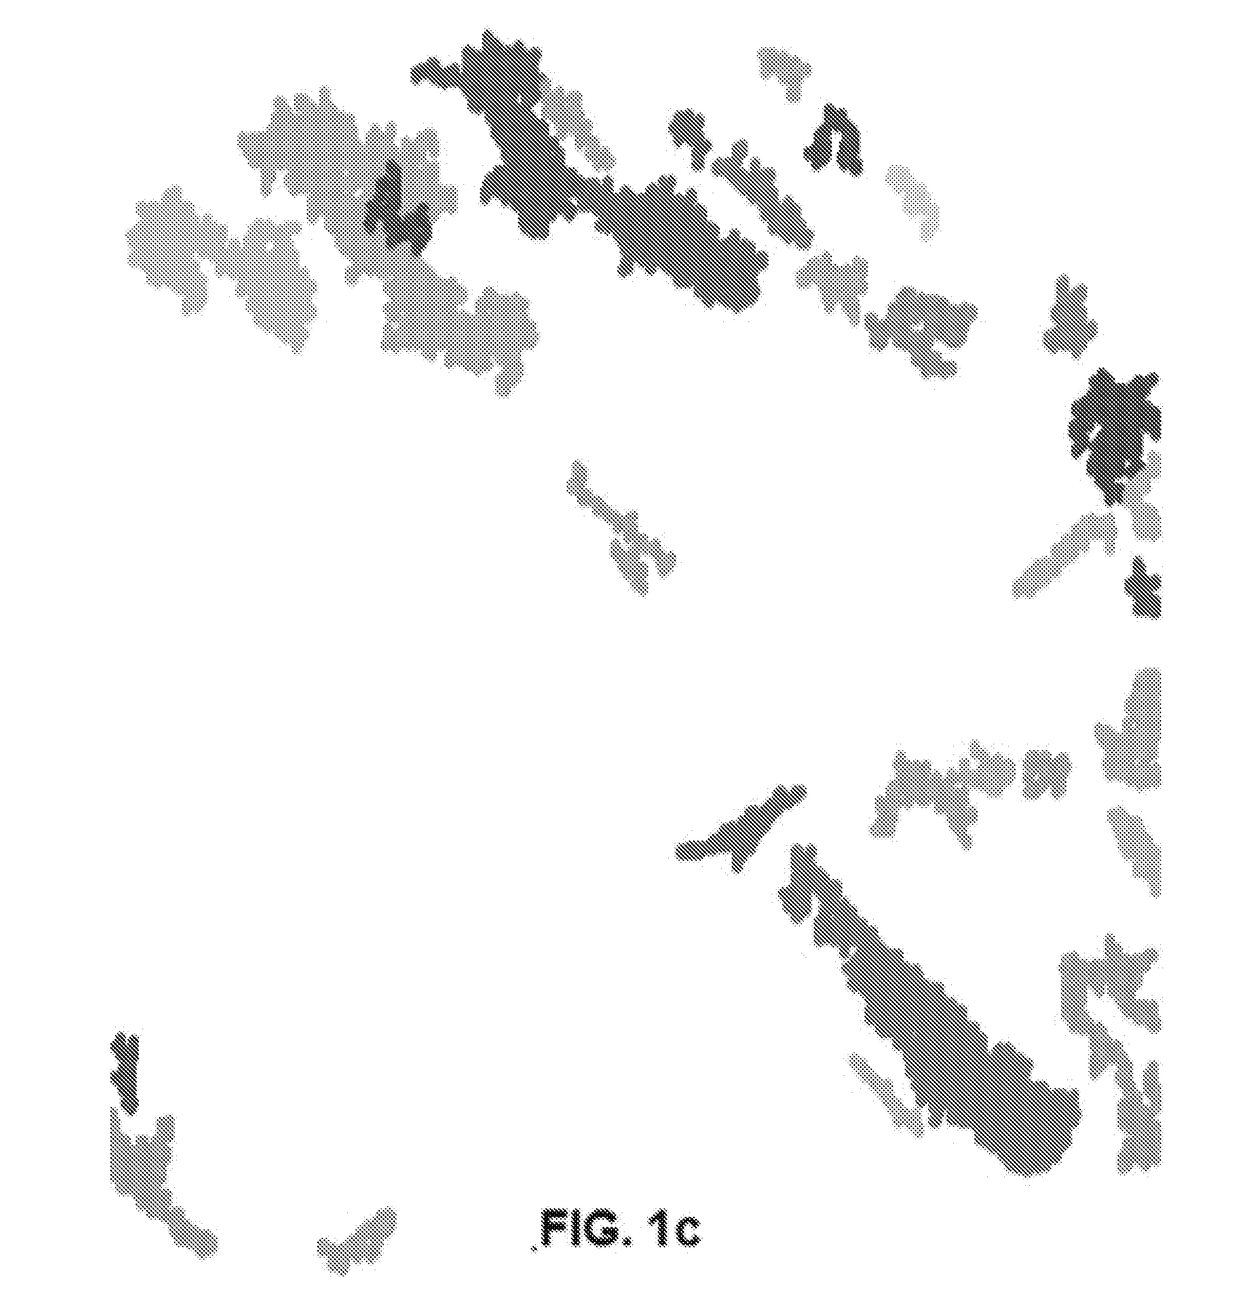 Method for aerial imagery acquisition and analysis